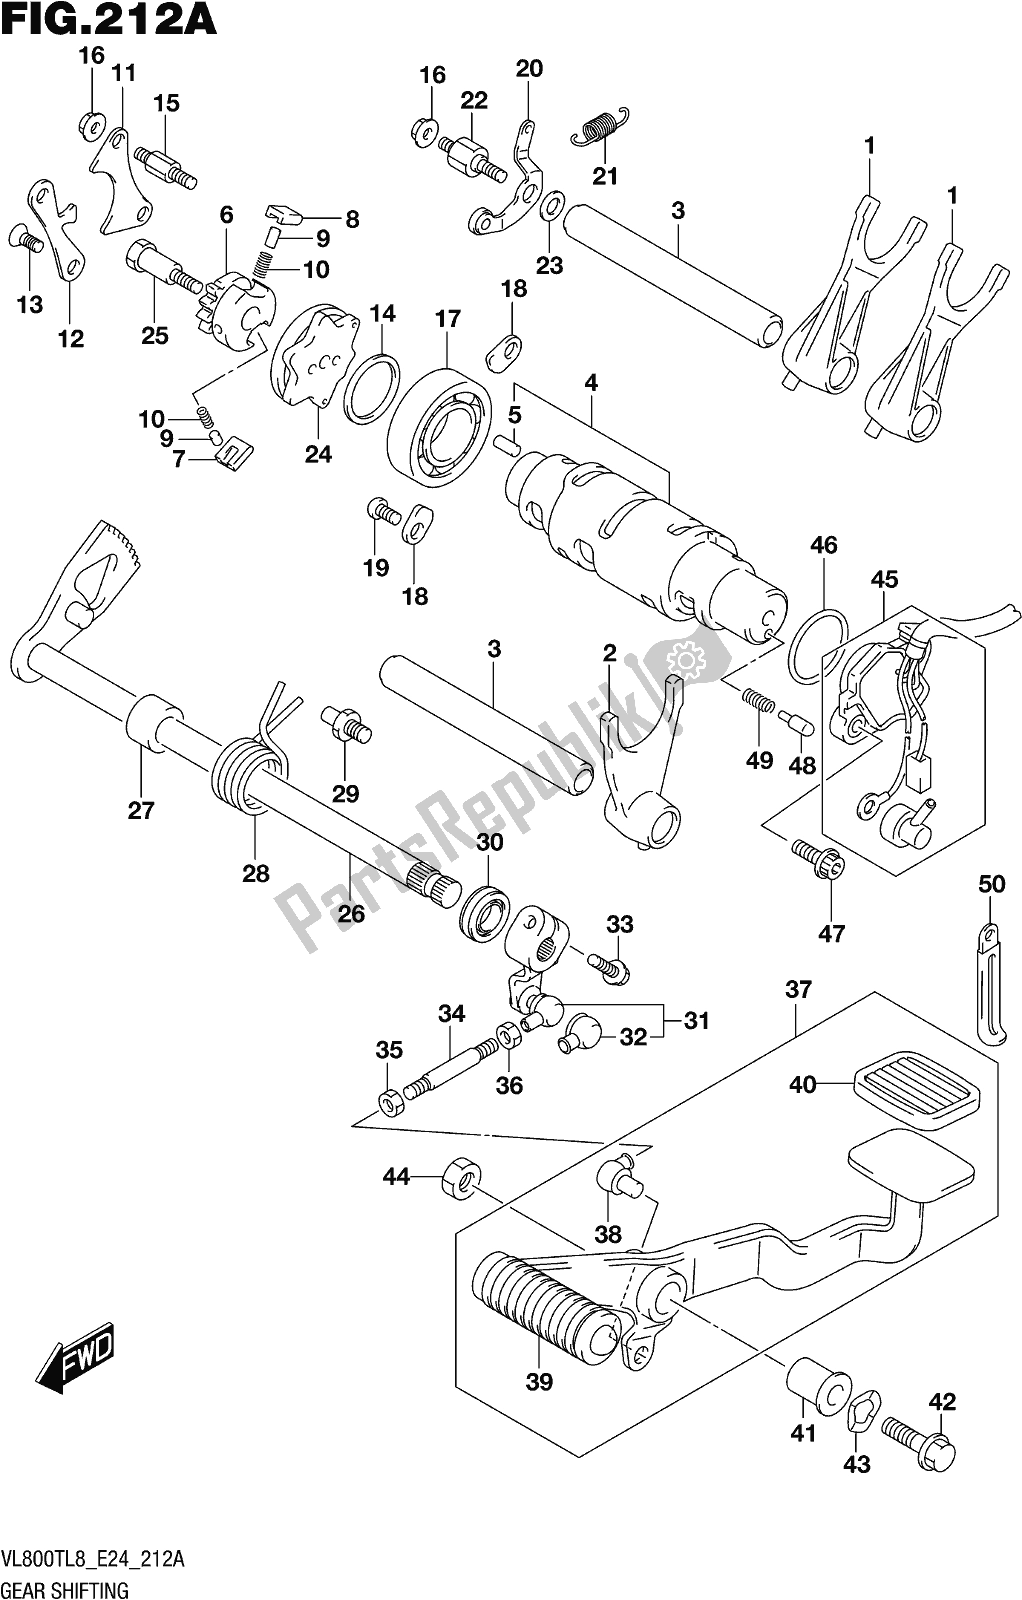 All parts for the Fig. 212a Gear Shifting of the Suzuki VL 800T 2018